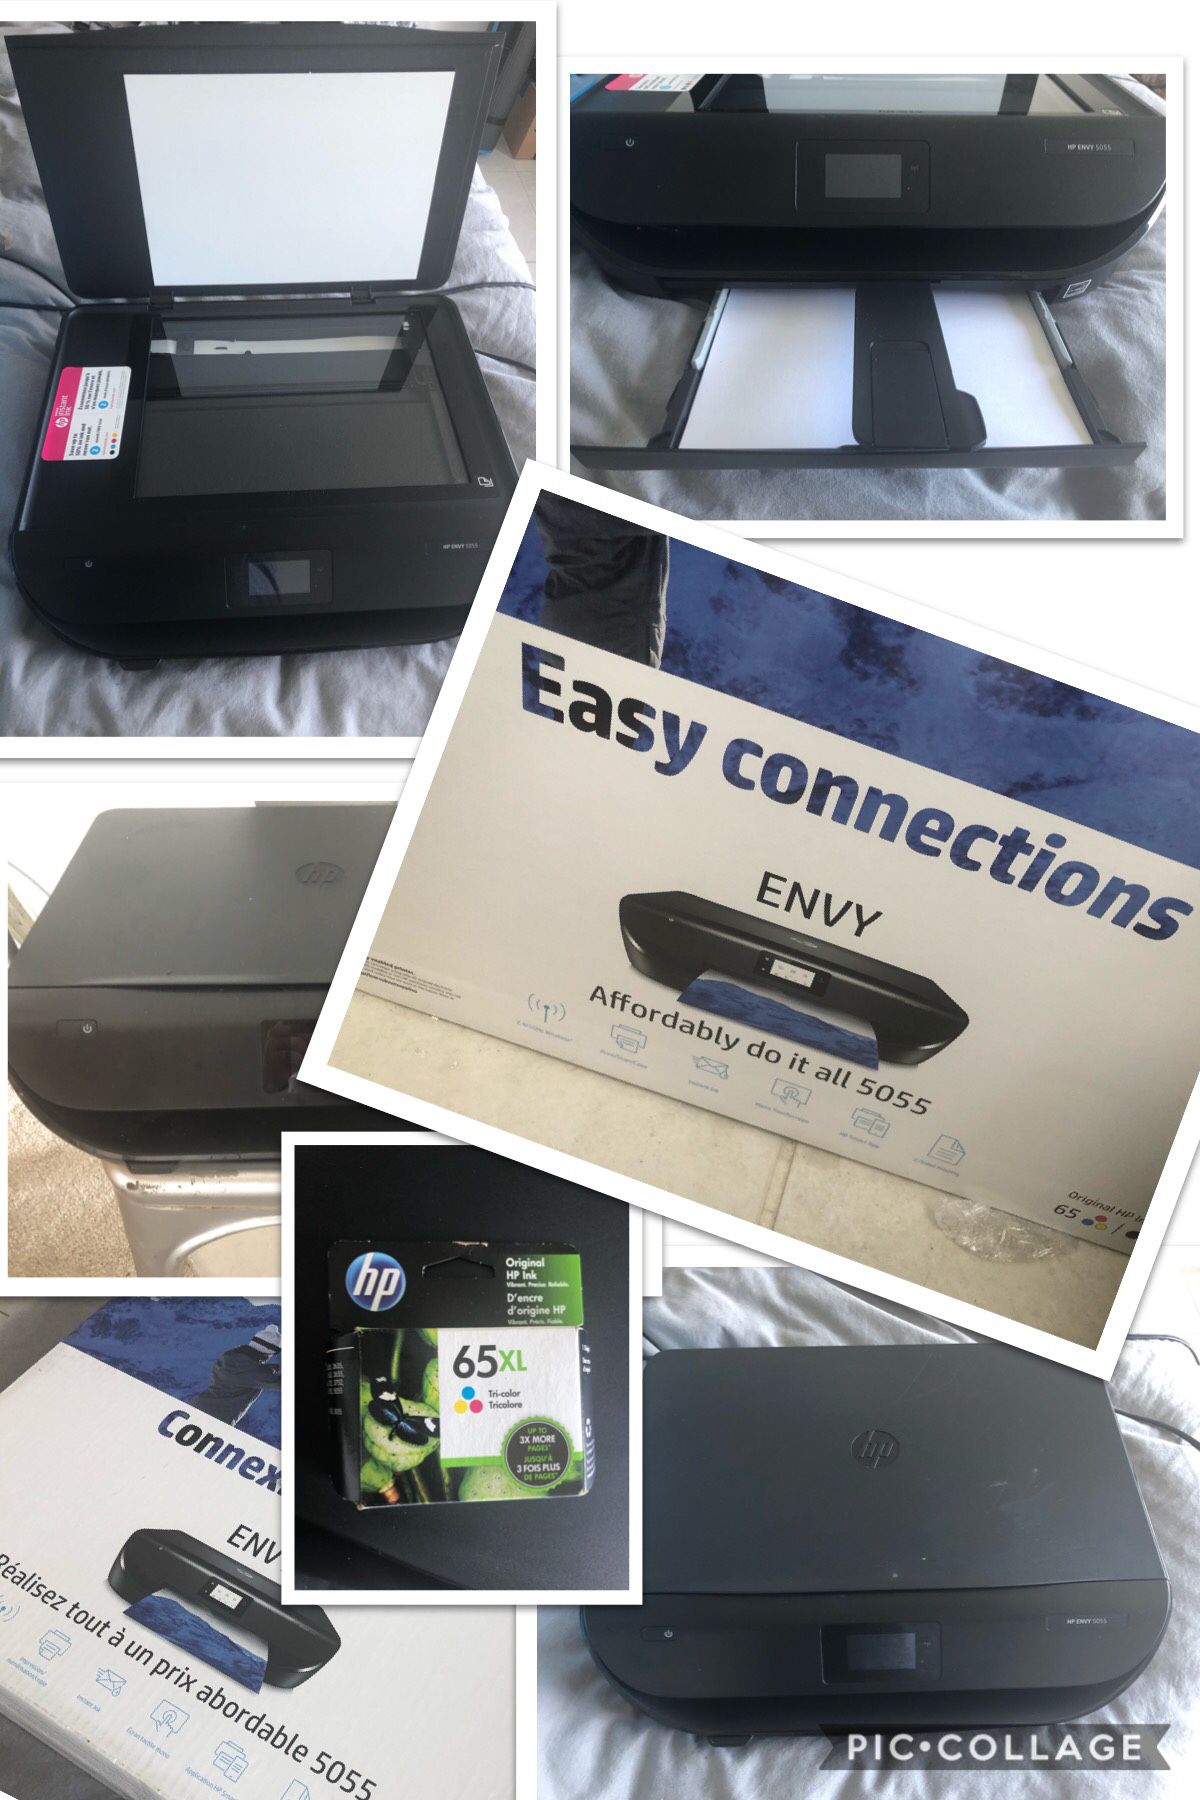 HP ENVY 5055 All-In-One Printer